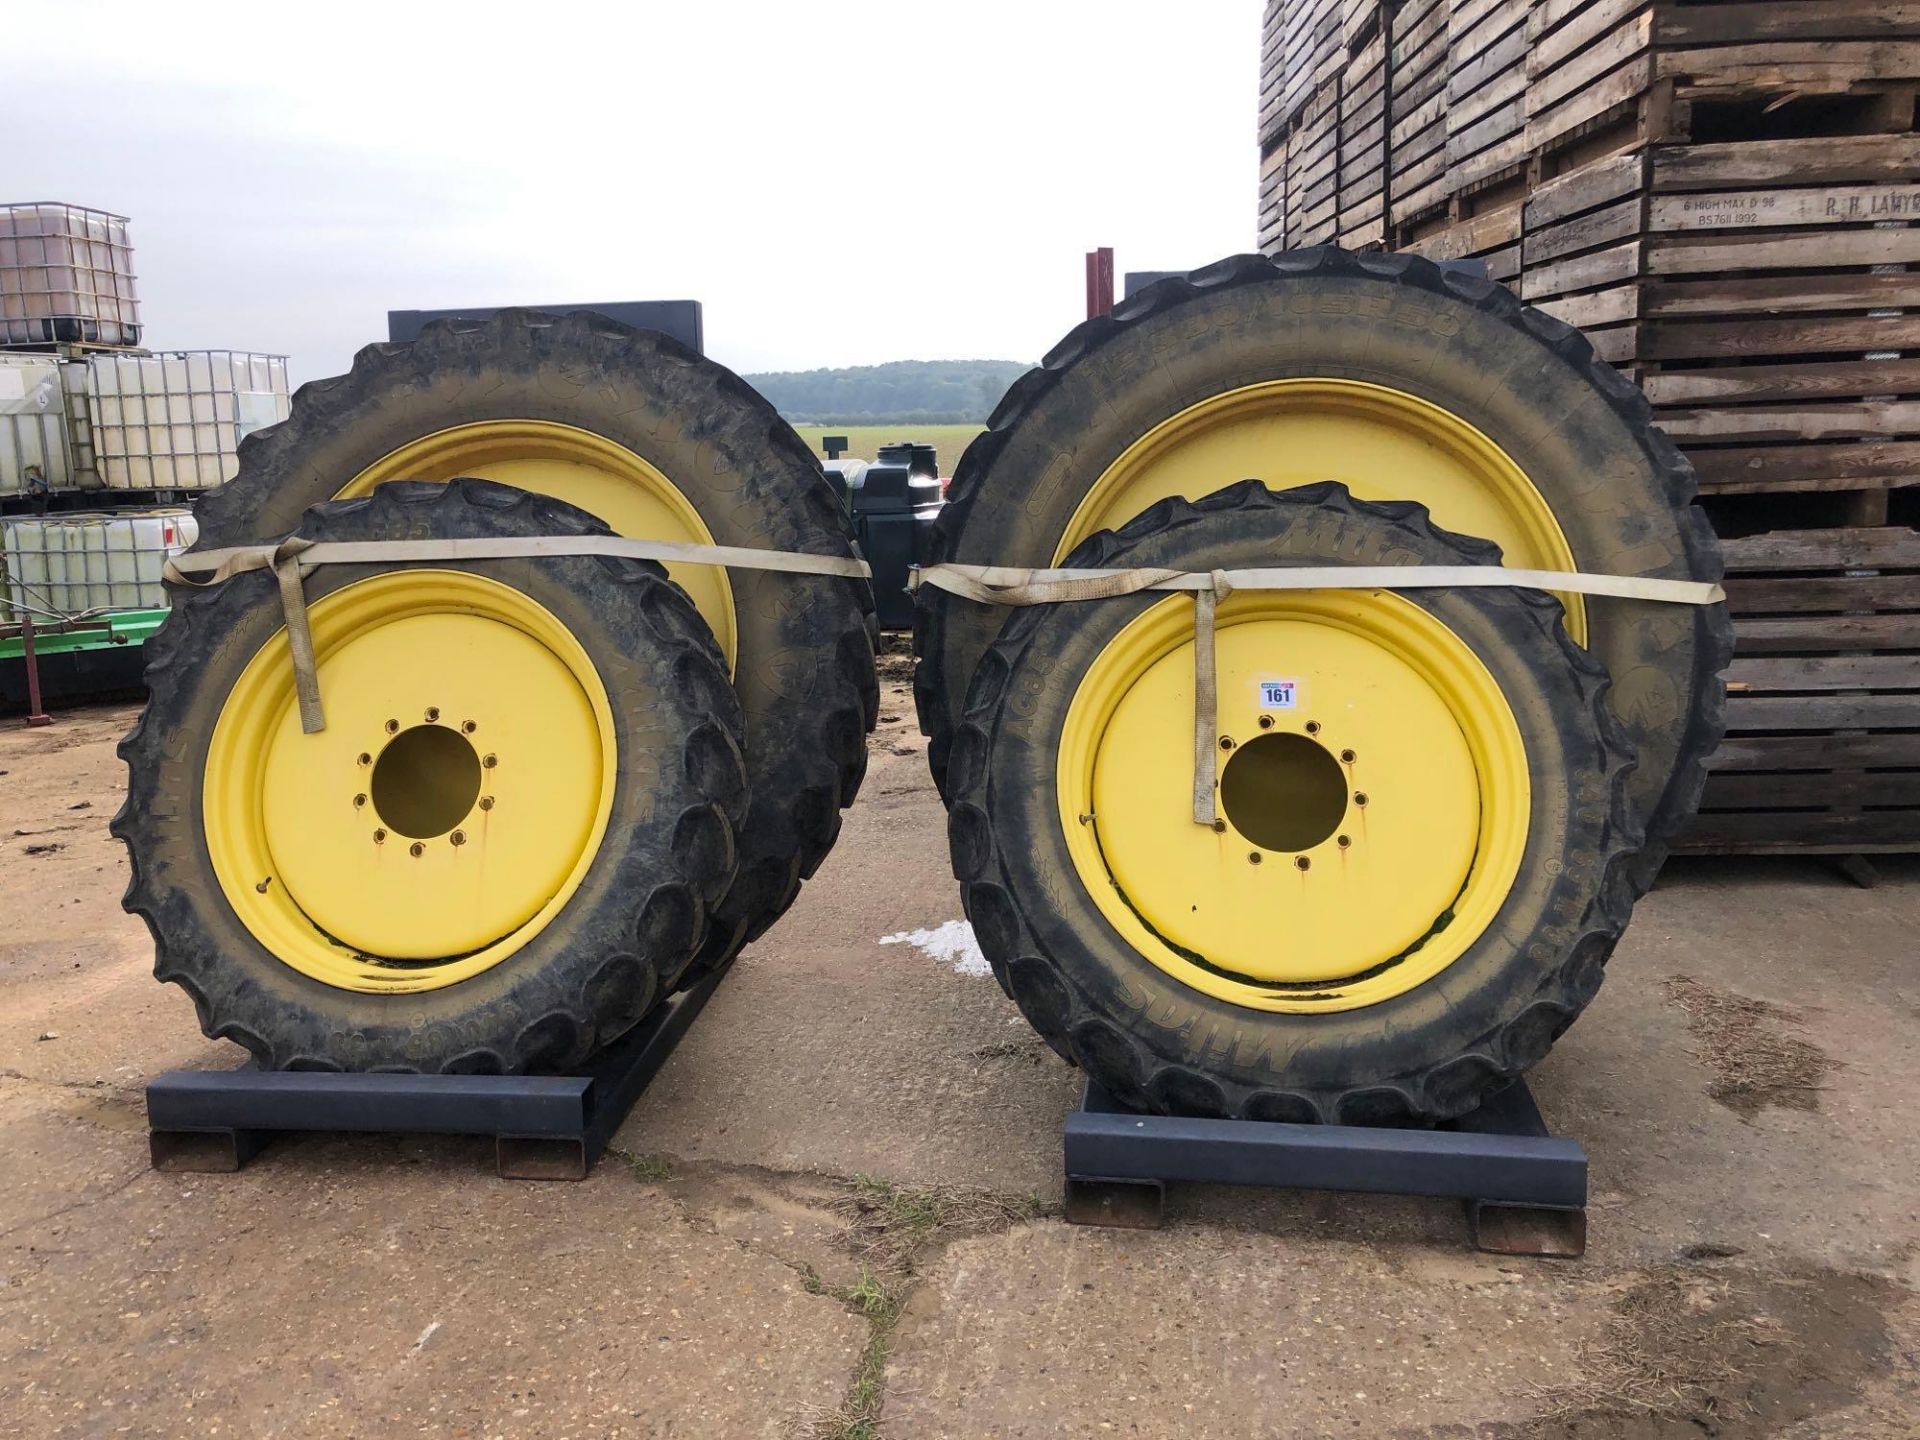 Set Mitas 340/85R38 front and Firestone 380/105R50 rear wheels and tyres with John Deere centres